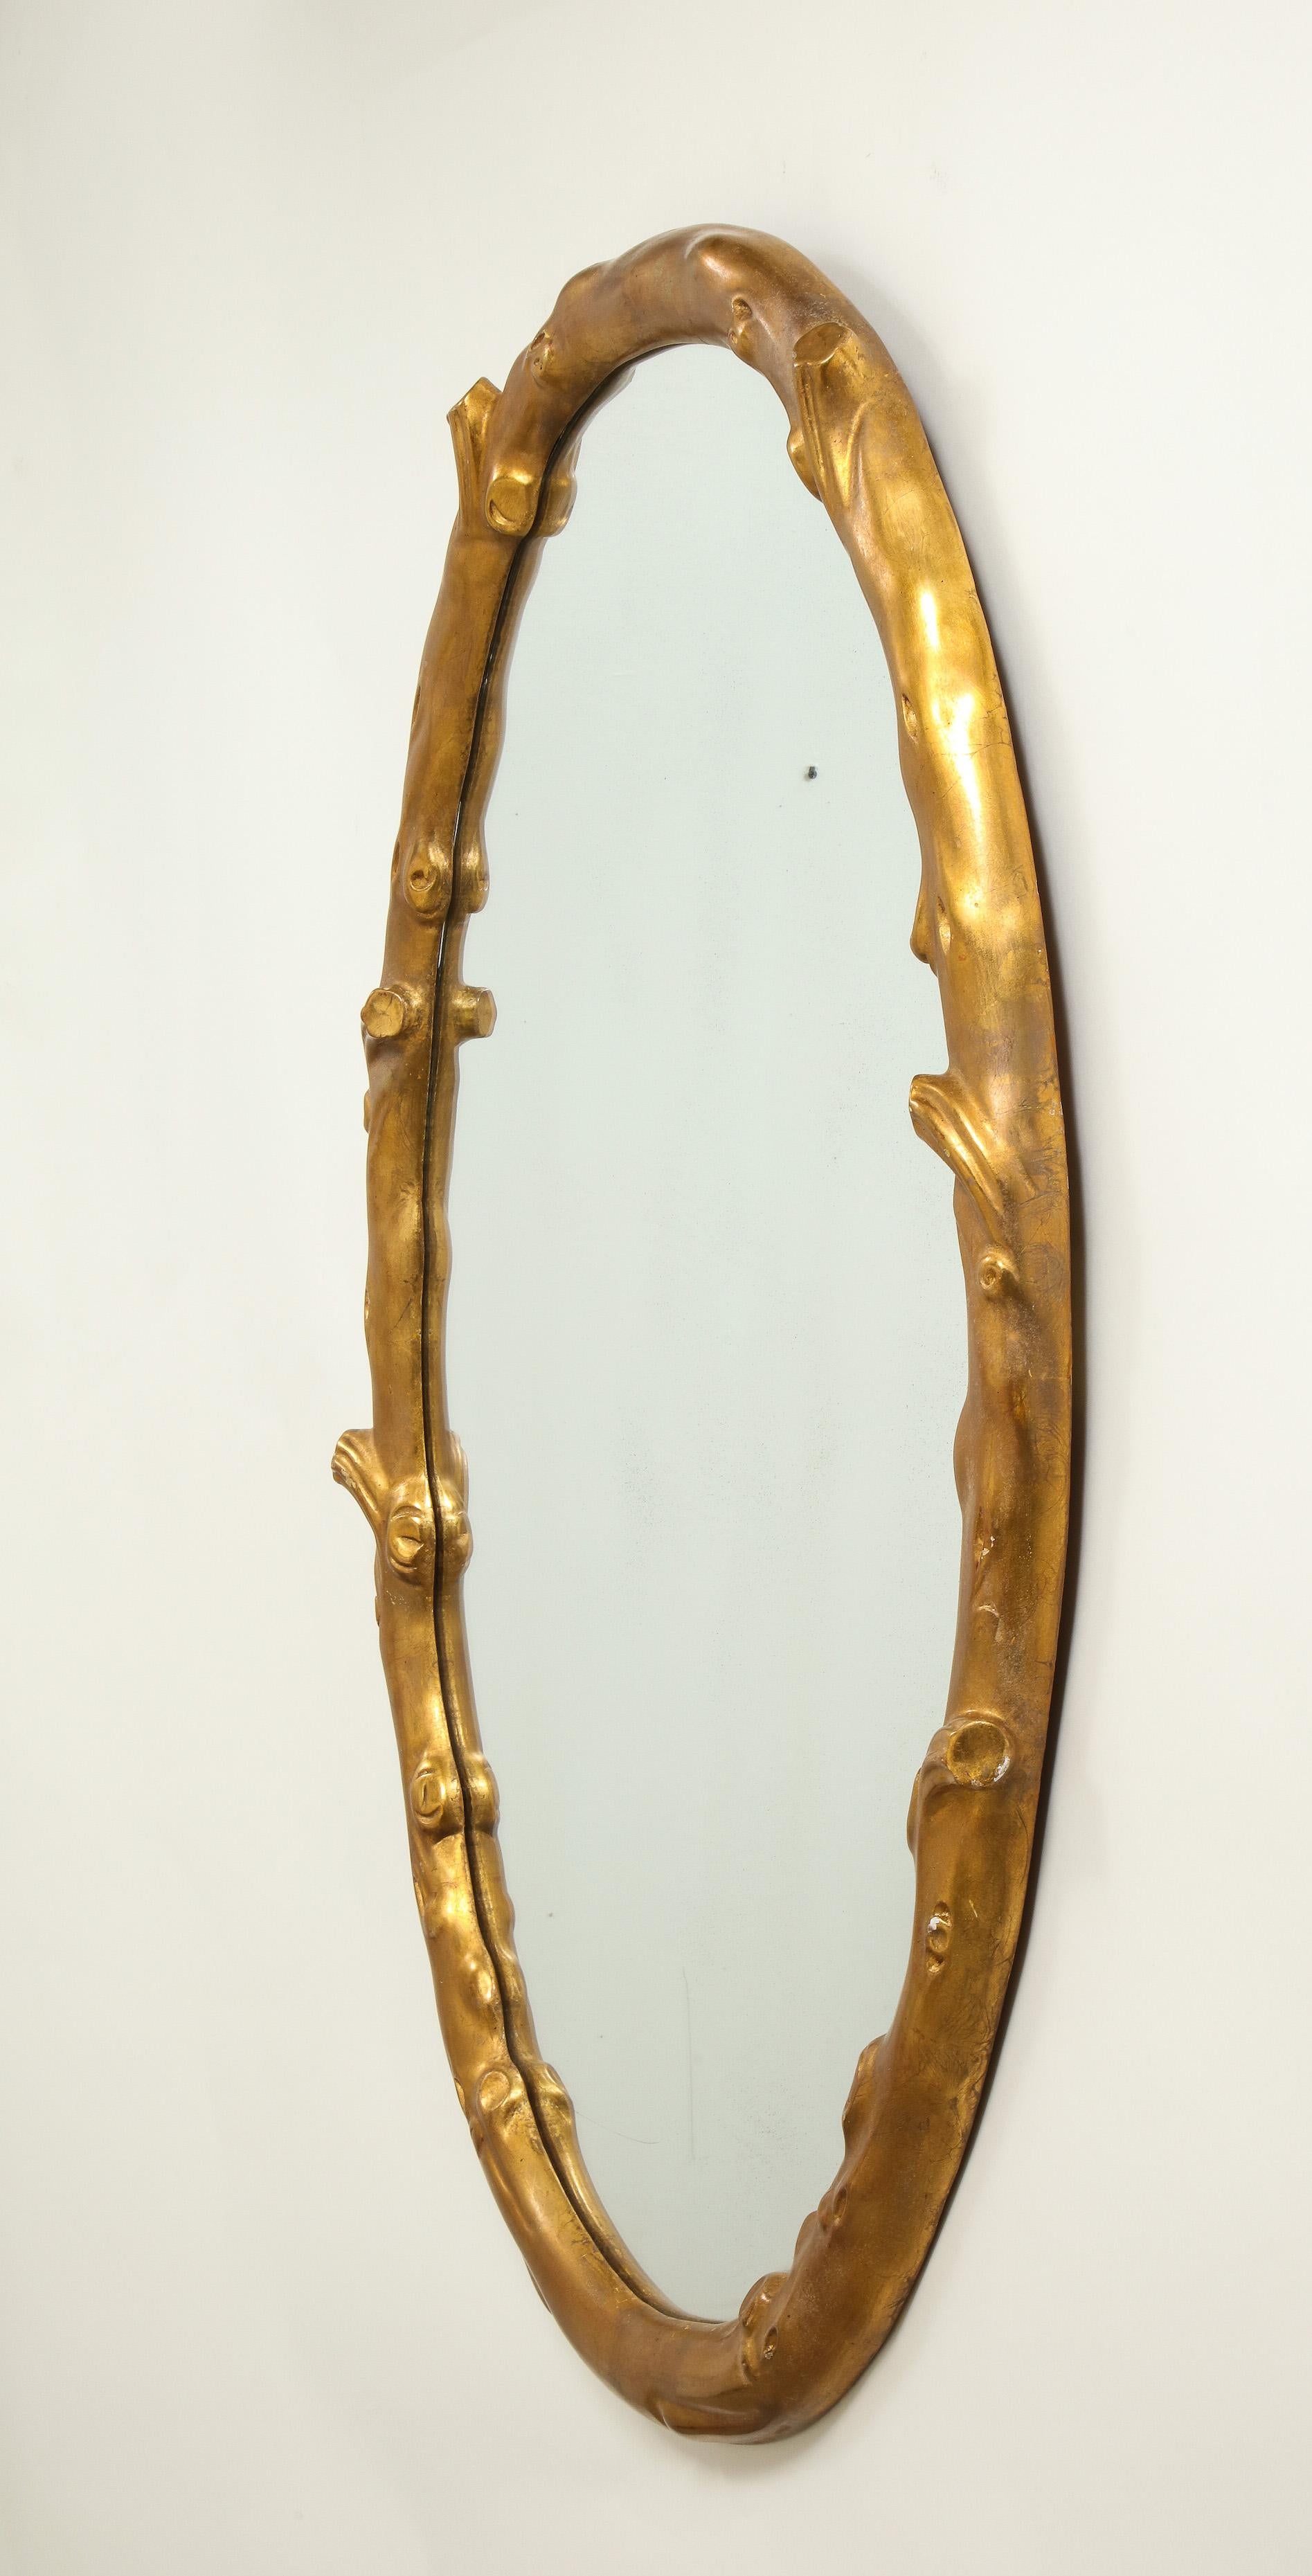 20th Century Oval Giltwood Faux Bois Mirror